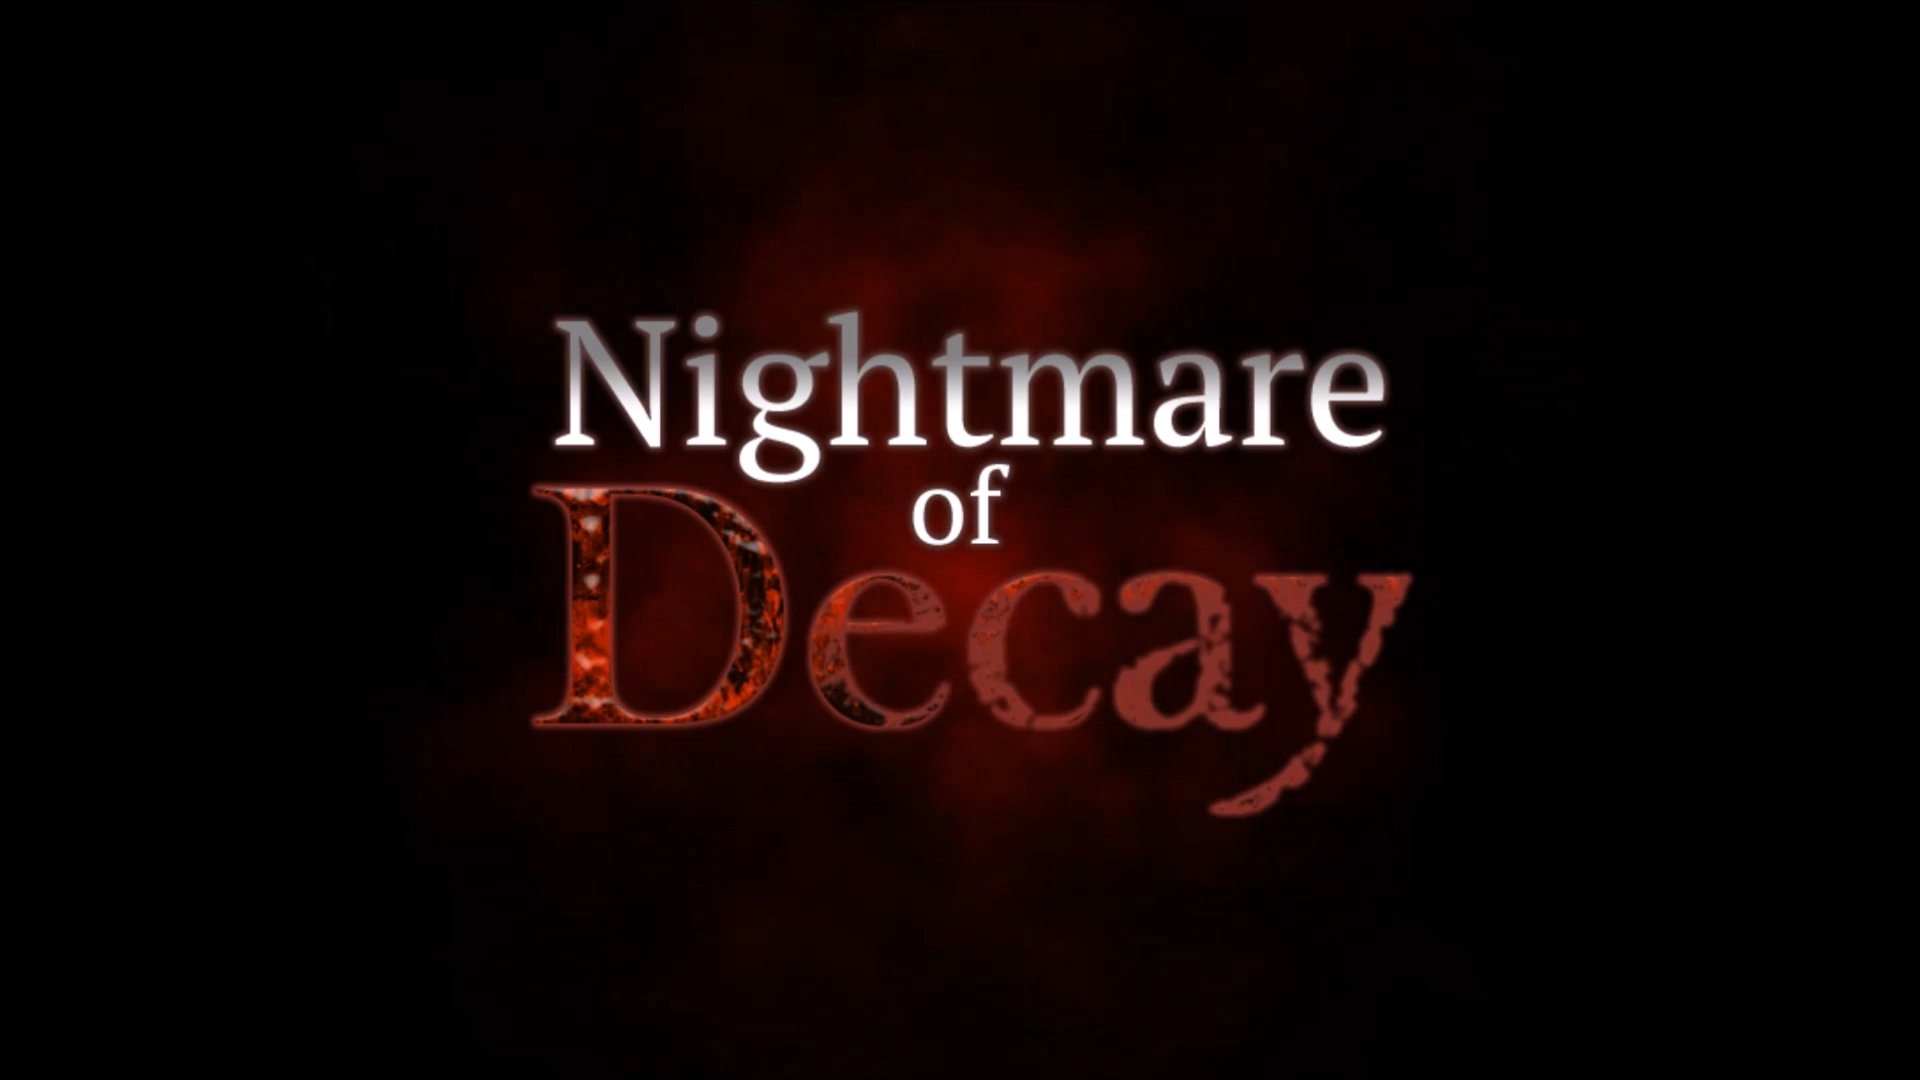 Let’s Play Checkmaty’s Nightmare of Decay (Steam)